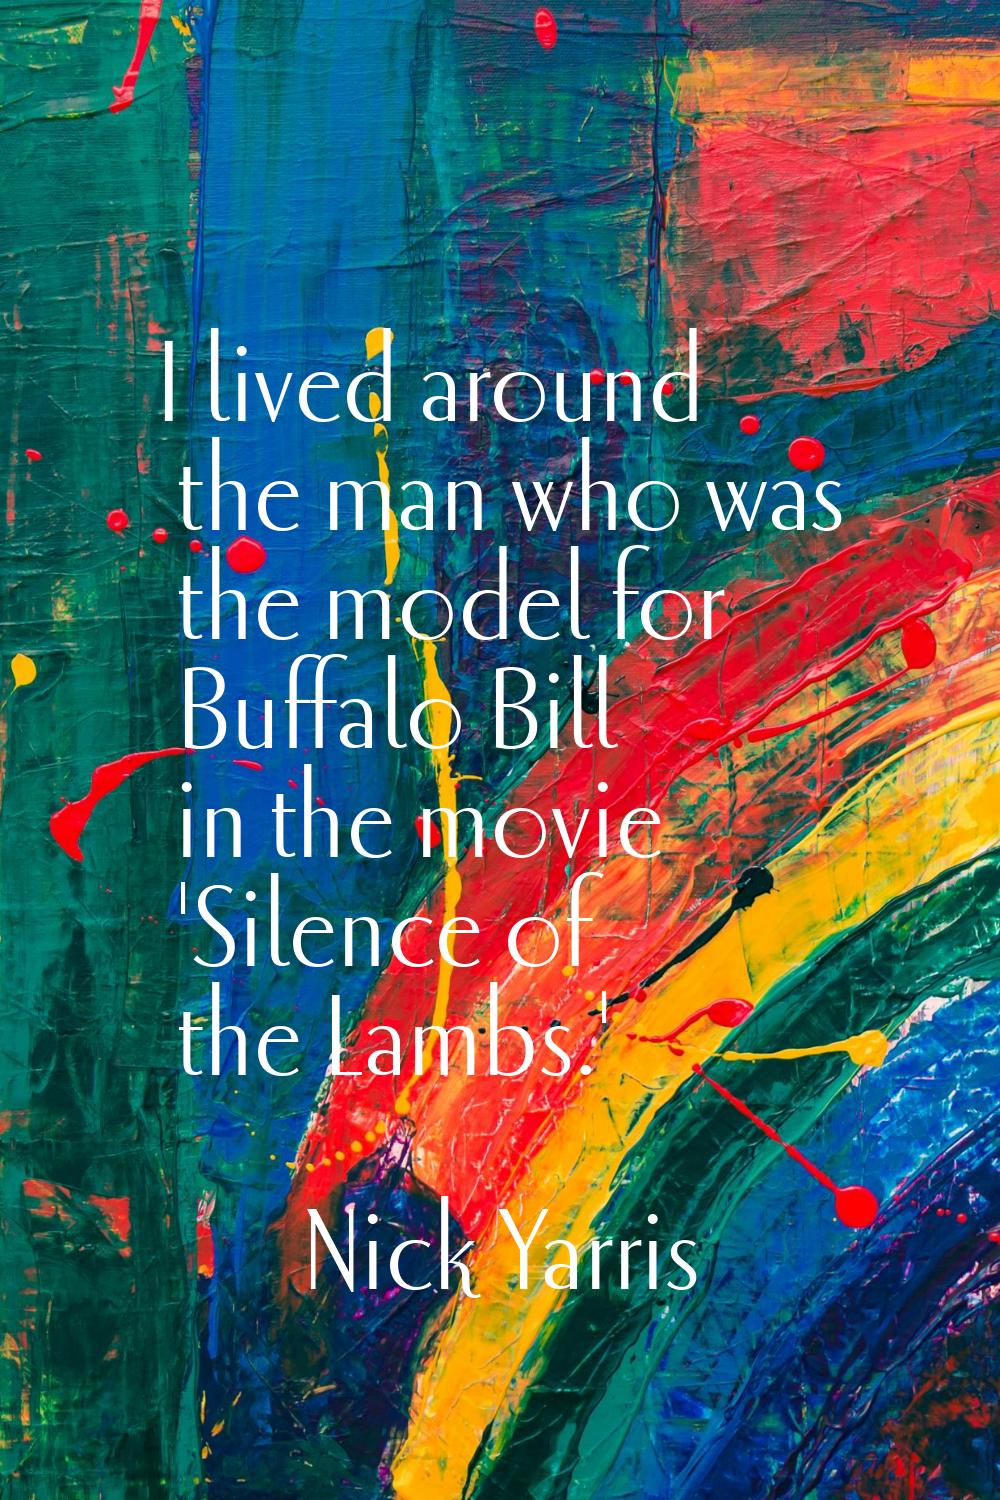 I lived around the man who was the model for Buffalo Bill in the movie 'Silence of the Lambs.'